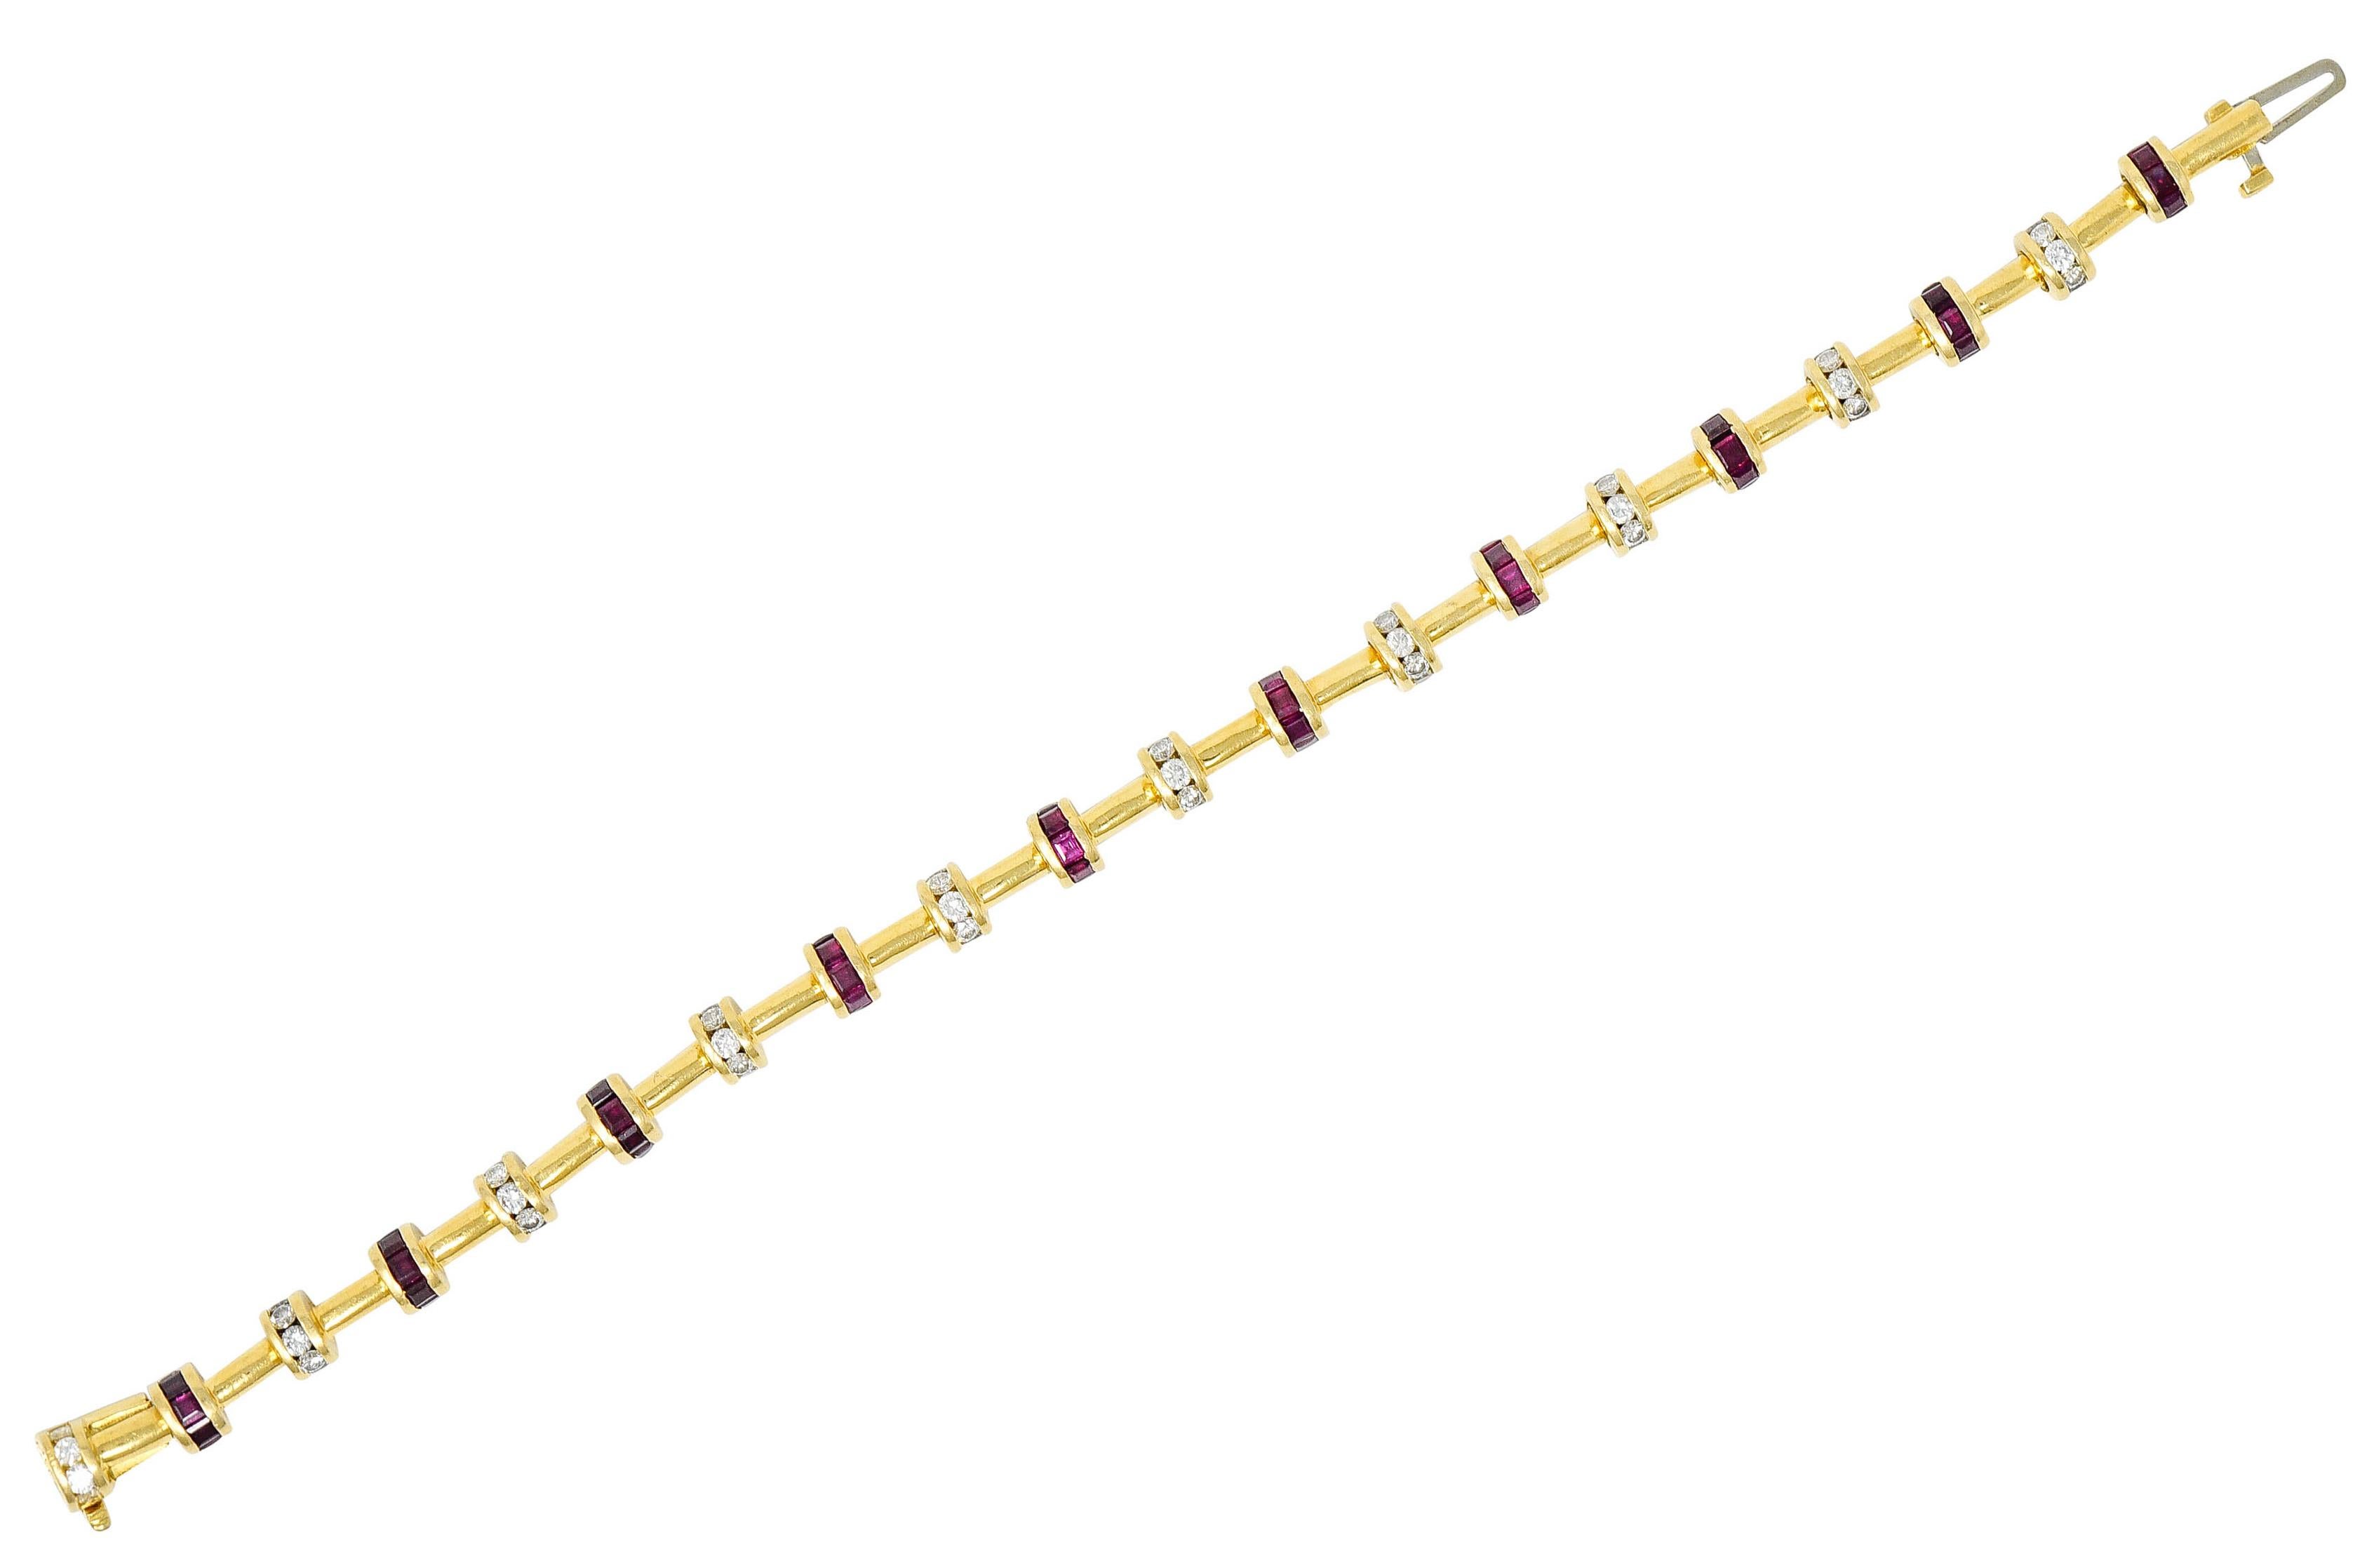 Bracelet is comprised of smooth bar links alternating with gemmed barrel links

Featuring round brilliant cut diamonds weighing in total approximately 1.50 - G/H color with VS clarity

Square cut rubies weighing in total approximately 4.50 carat -